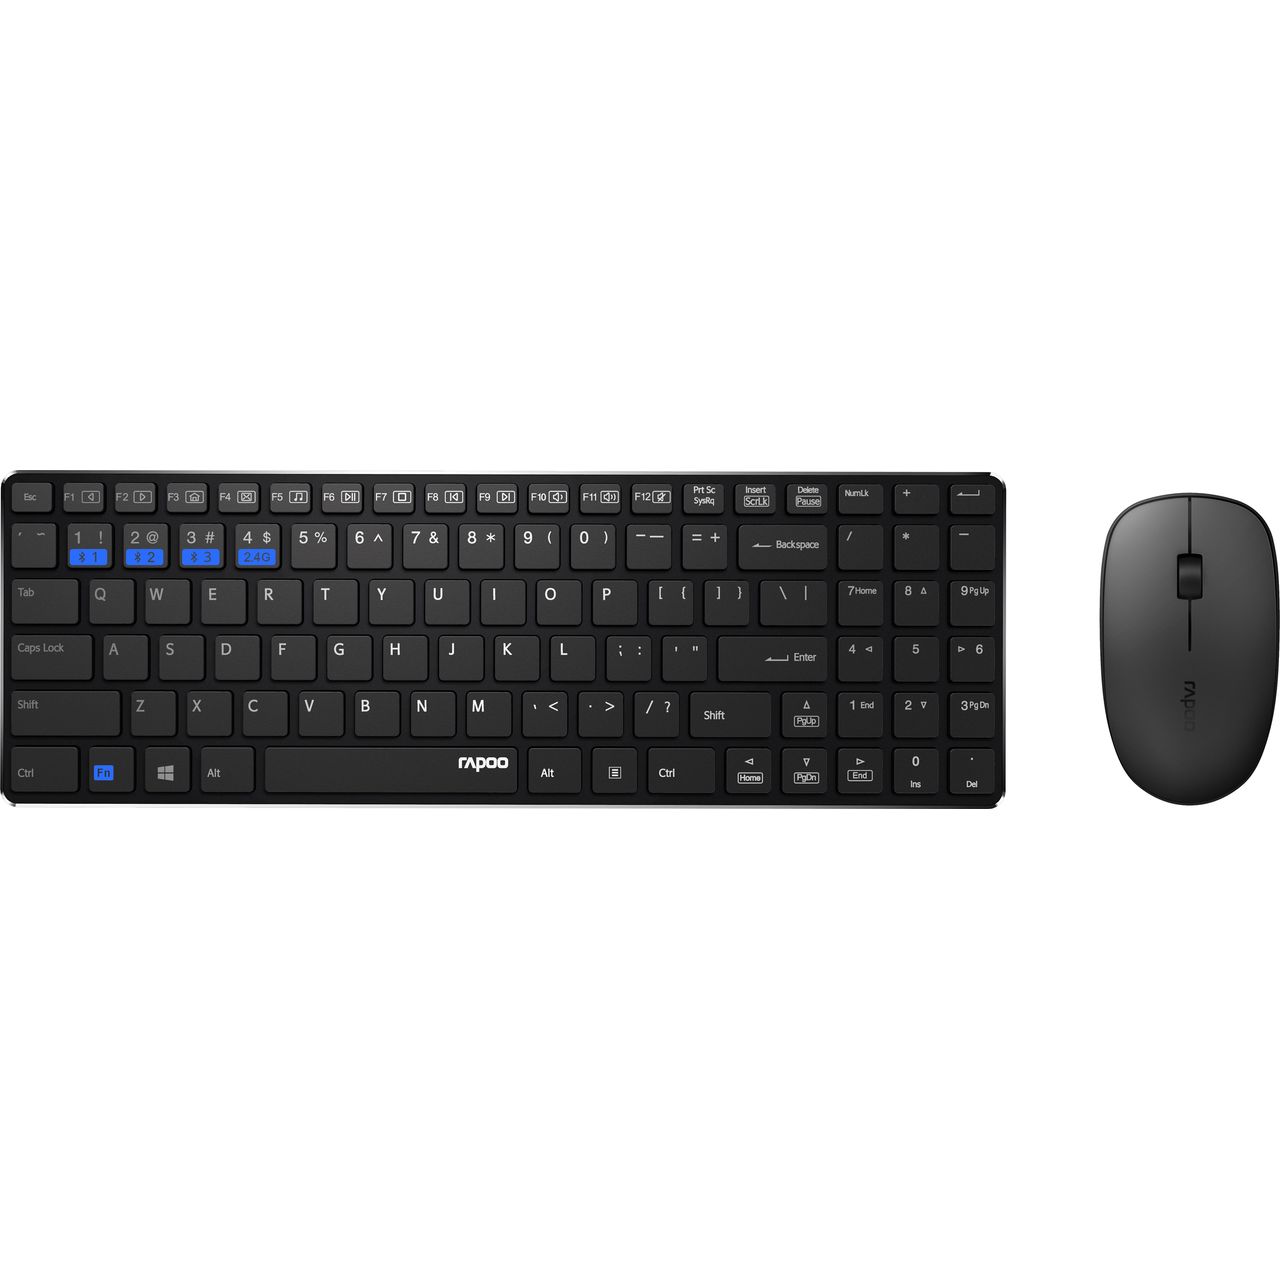 Rapoo 9300M Ultra-Slim Desktop Combo Bluetooth / Wireless USB Keyboard with Optical Mouse Review